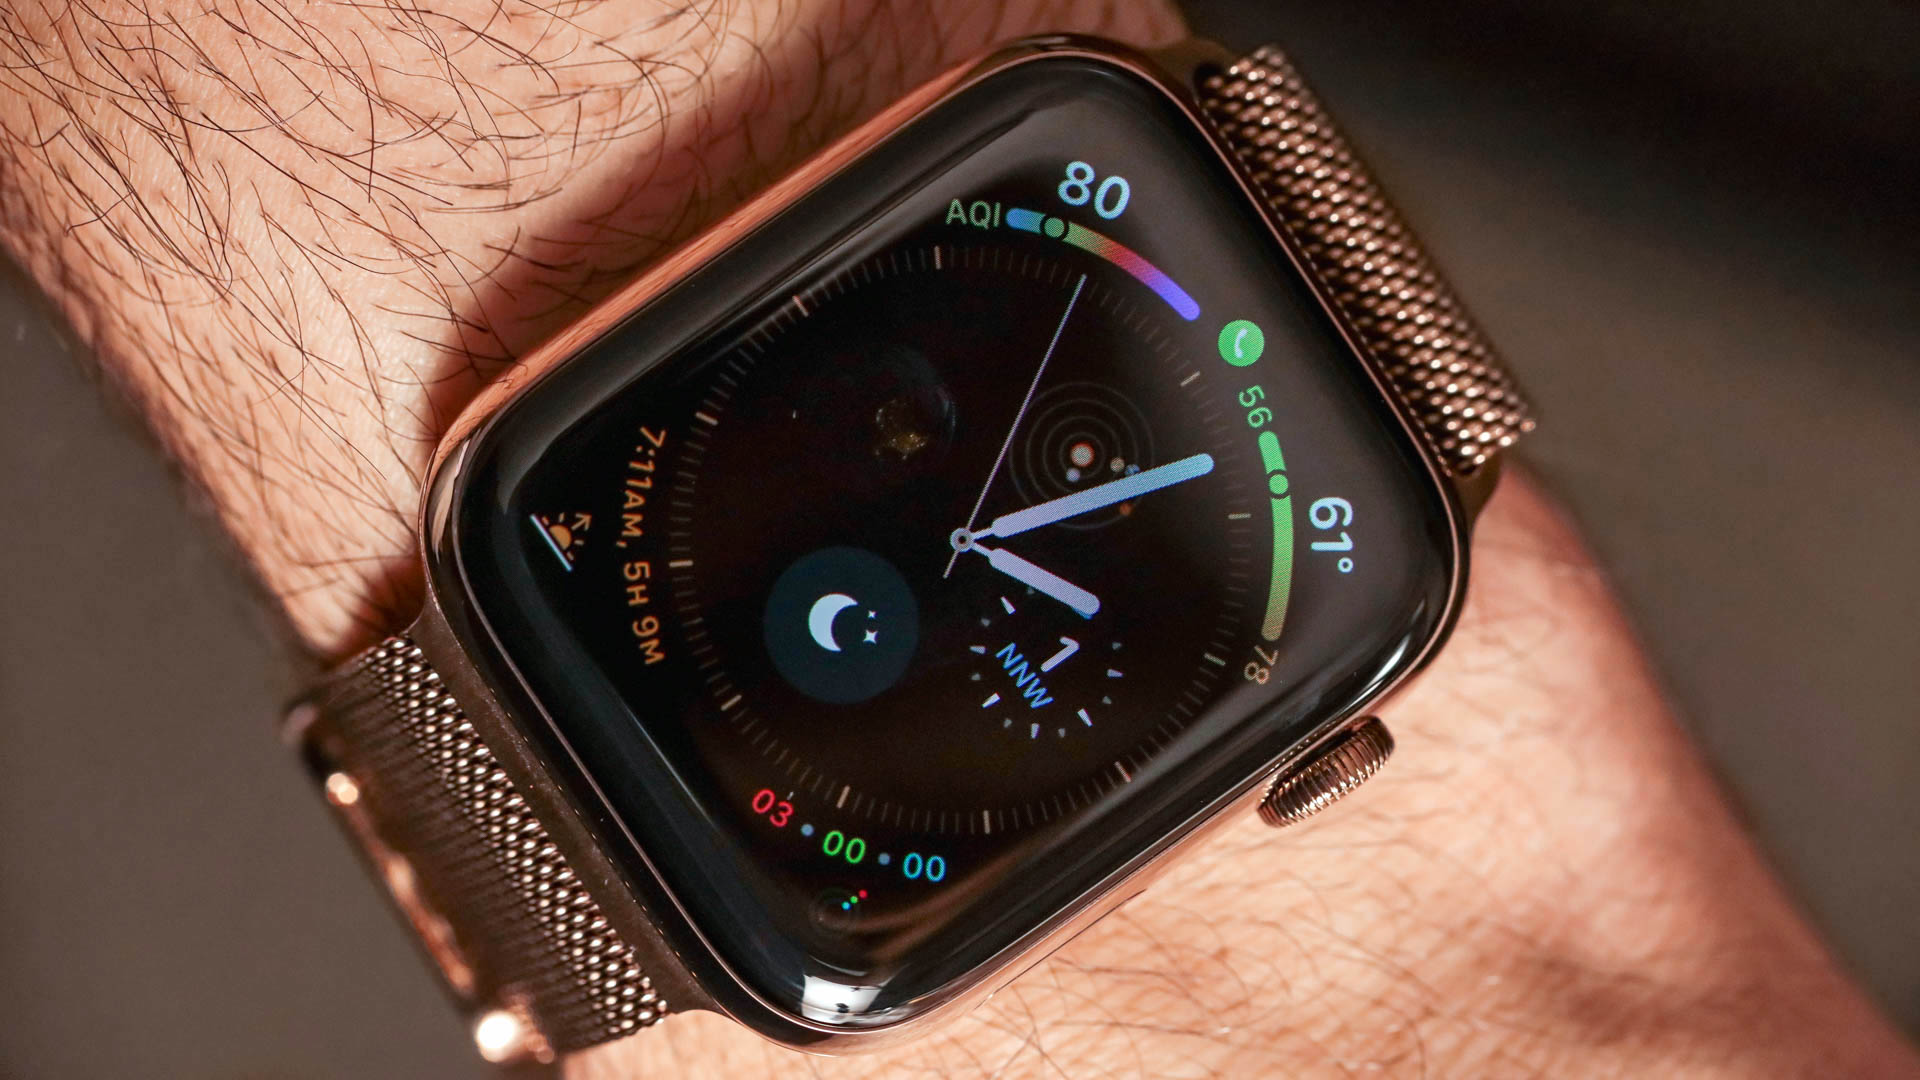 Apple Watch Series 4 Infograph Face: How Smart Design Improves Data Monitoring